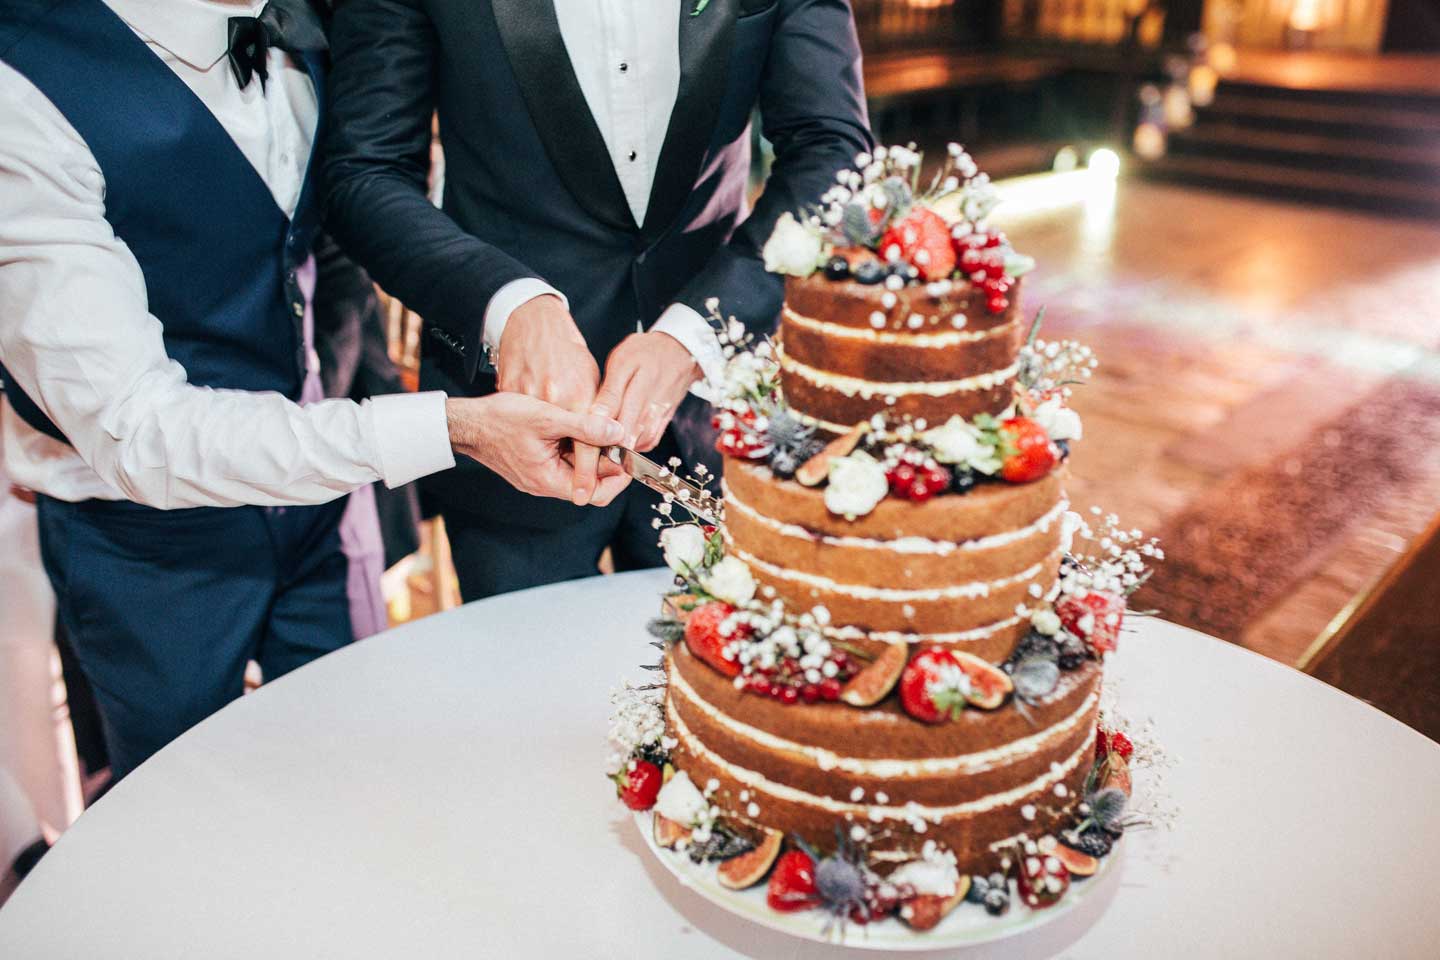 Aaron-and-Phil-naked-wedding-cake-at-their-gay-wedding-at-the-Bodelian-Oxford-images-copyright-Stu-Heppell-via-The-Gay-Wedding-Guide